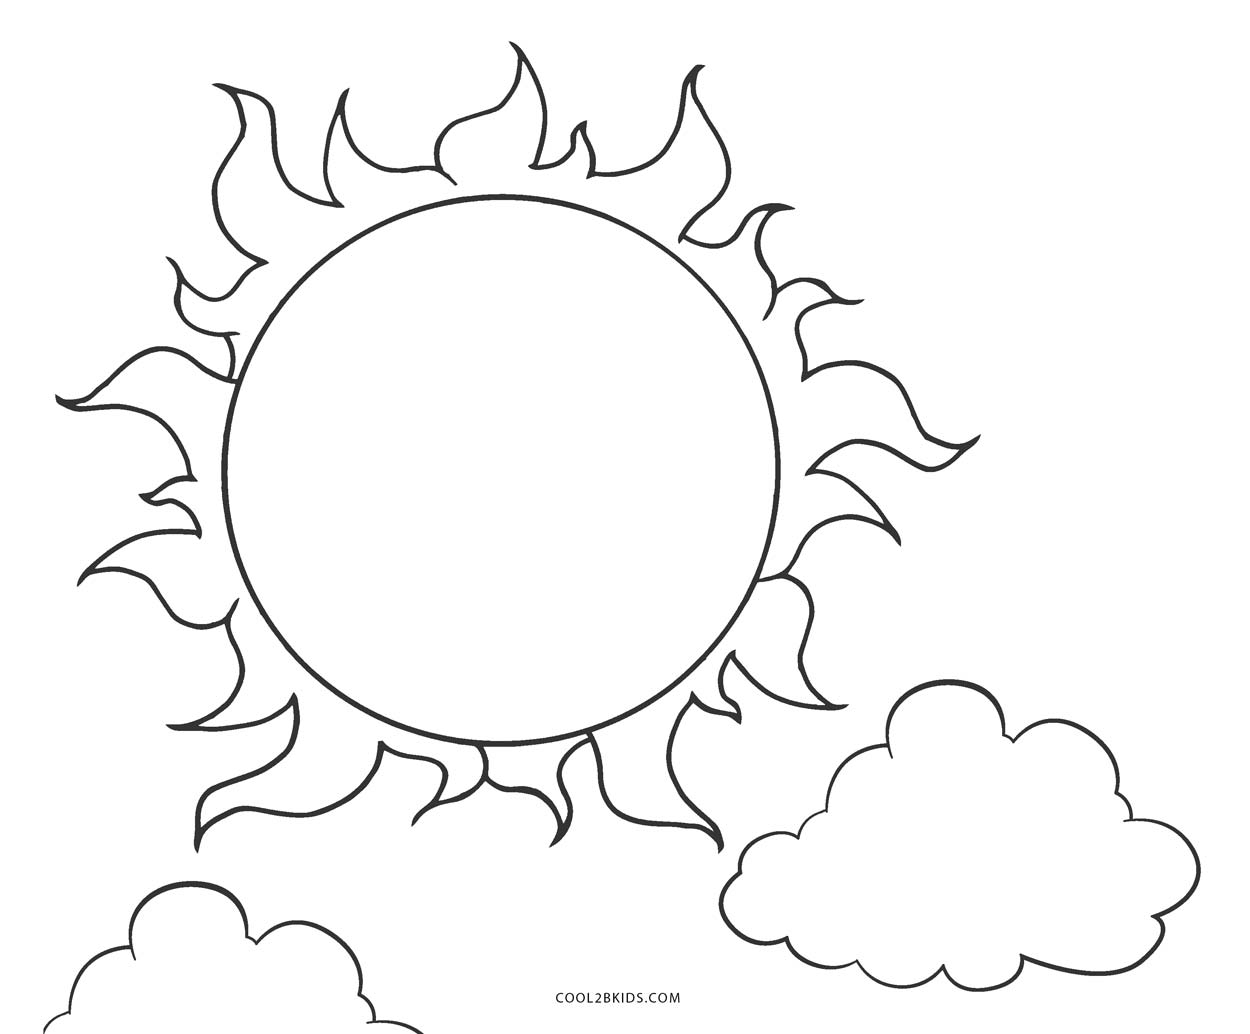 Coloring Pages Sun Free Printable Sun Coloring Pages For Kids Cool2bkids